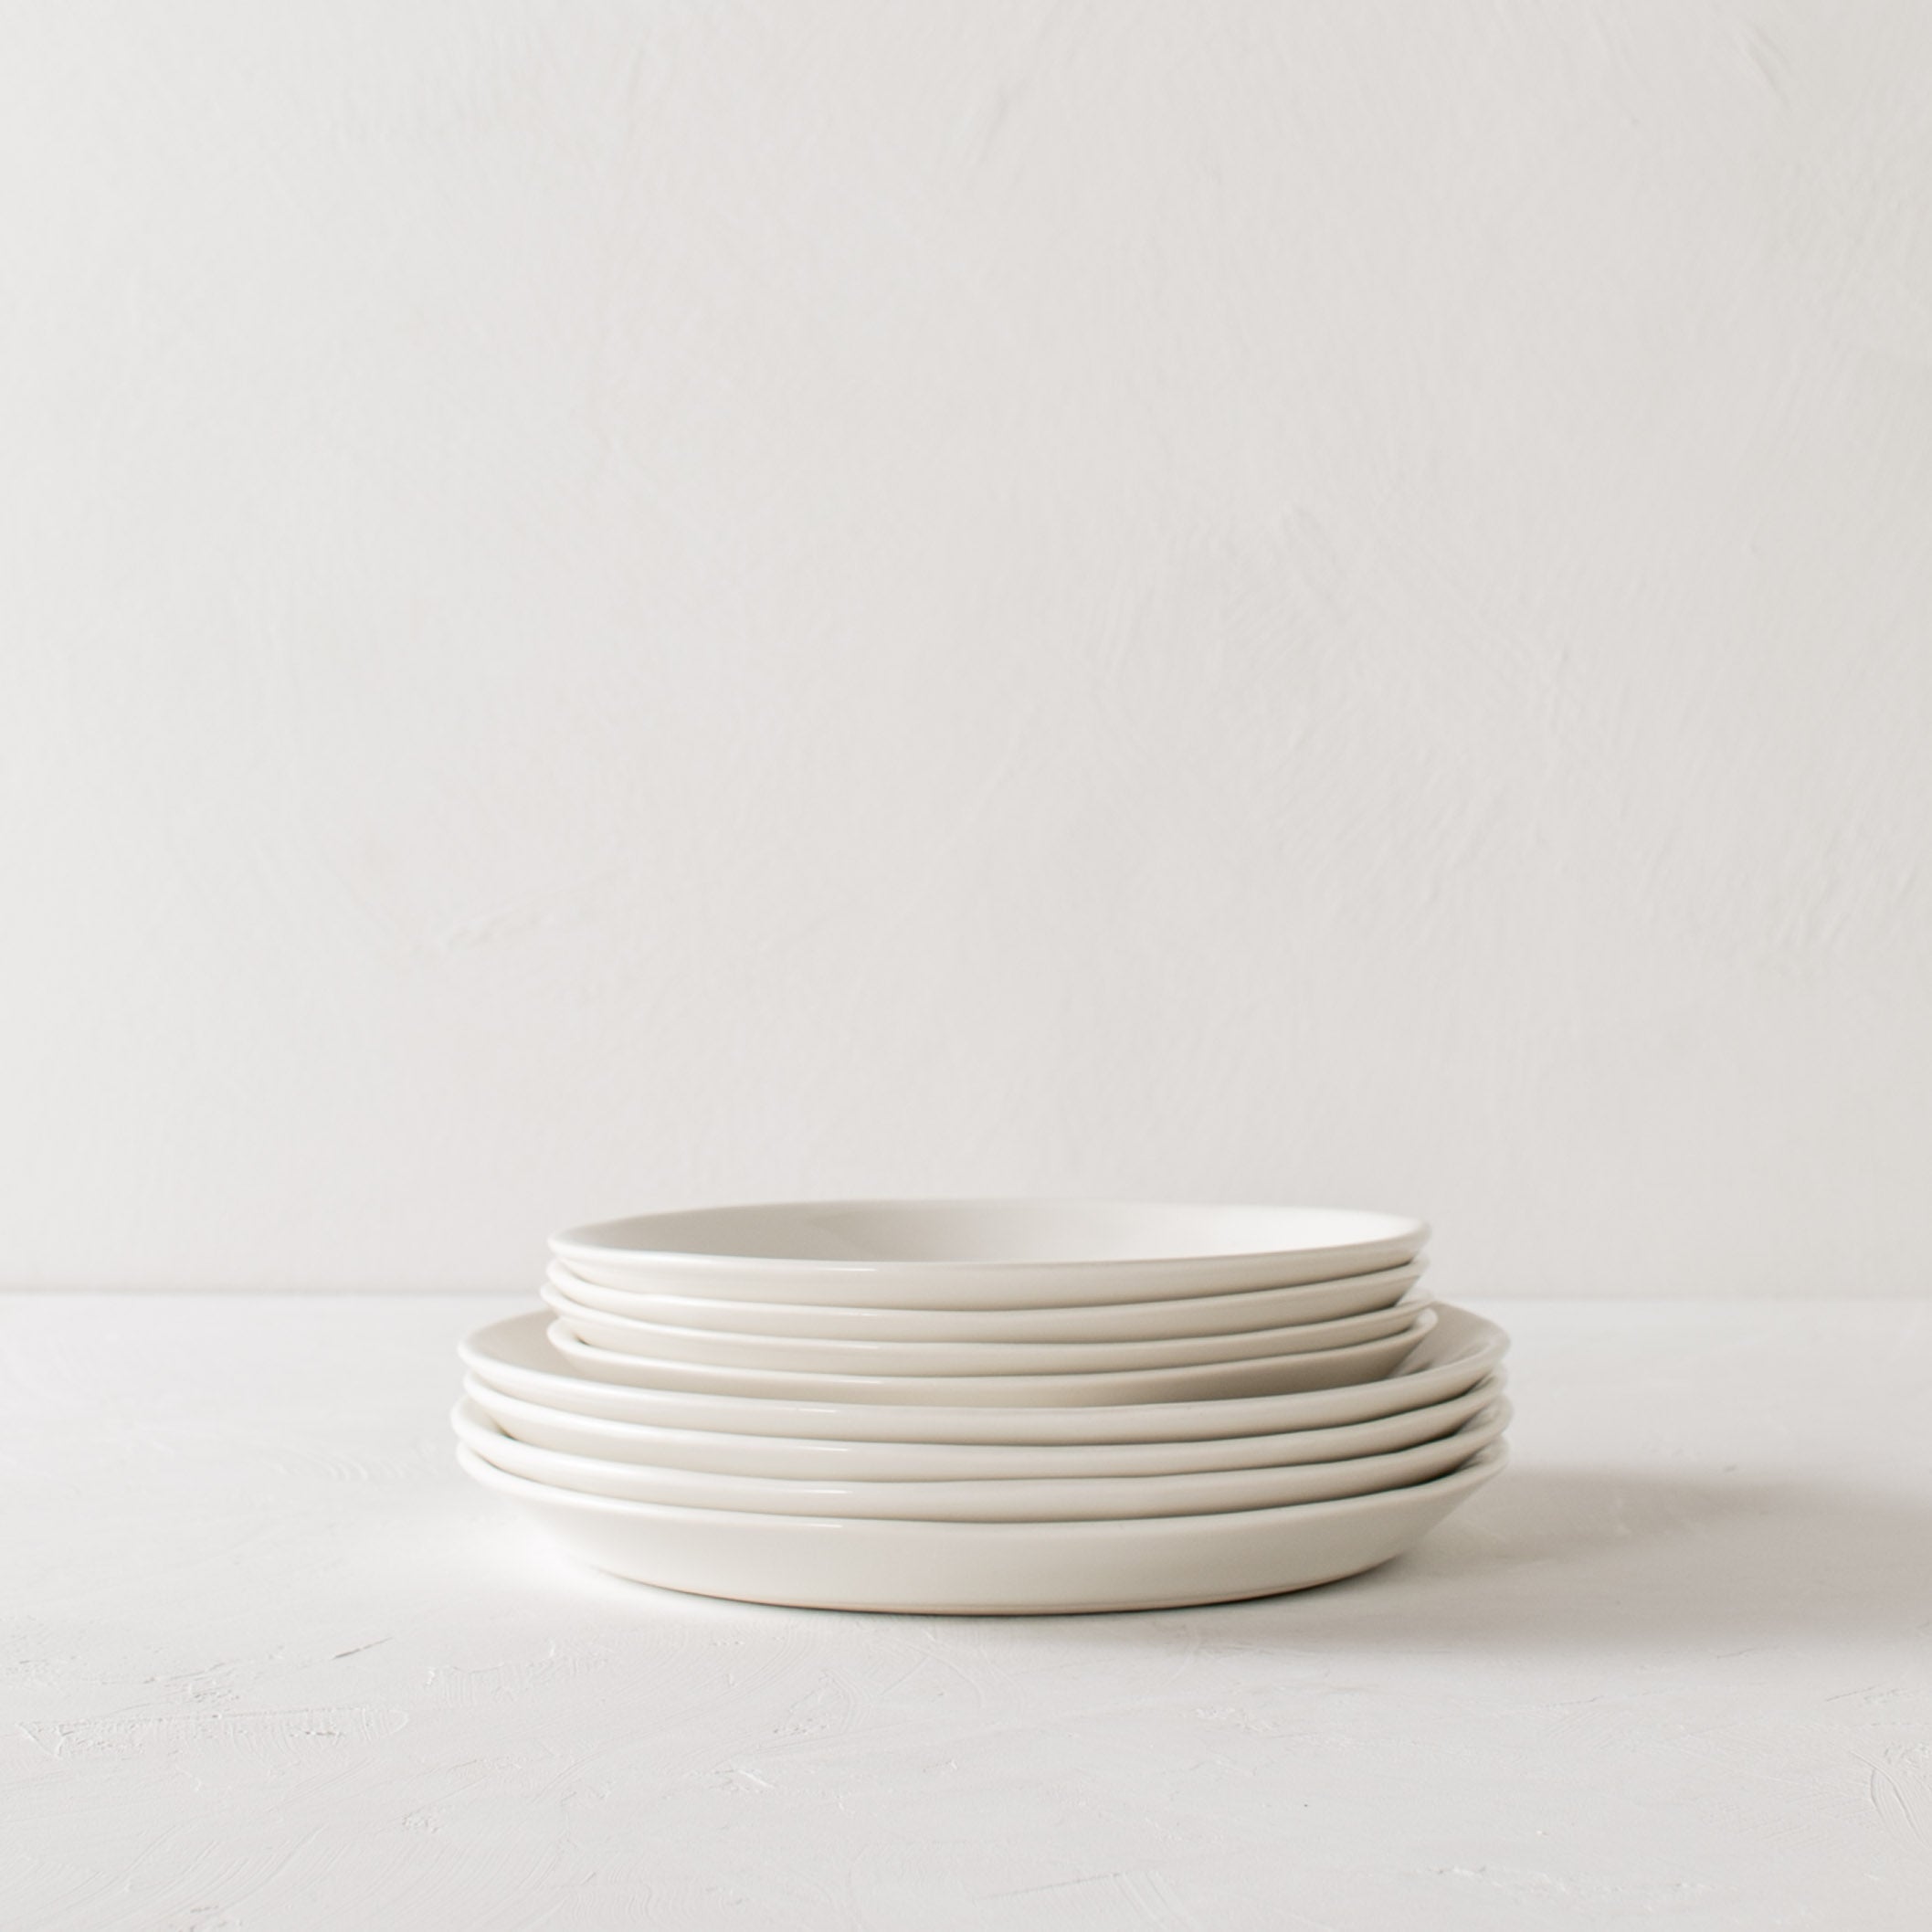 Stack of dinner plates and salad plates. Four salad plates on top of four dinner plates. Backdrops is a white plaster backdrop and white plaster textured tabletop. Handmade ceramic plates designed and sold by Convivial Production, Kansas City ceramics.